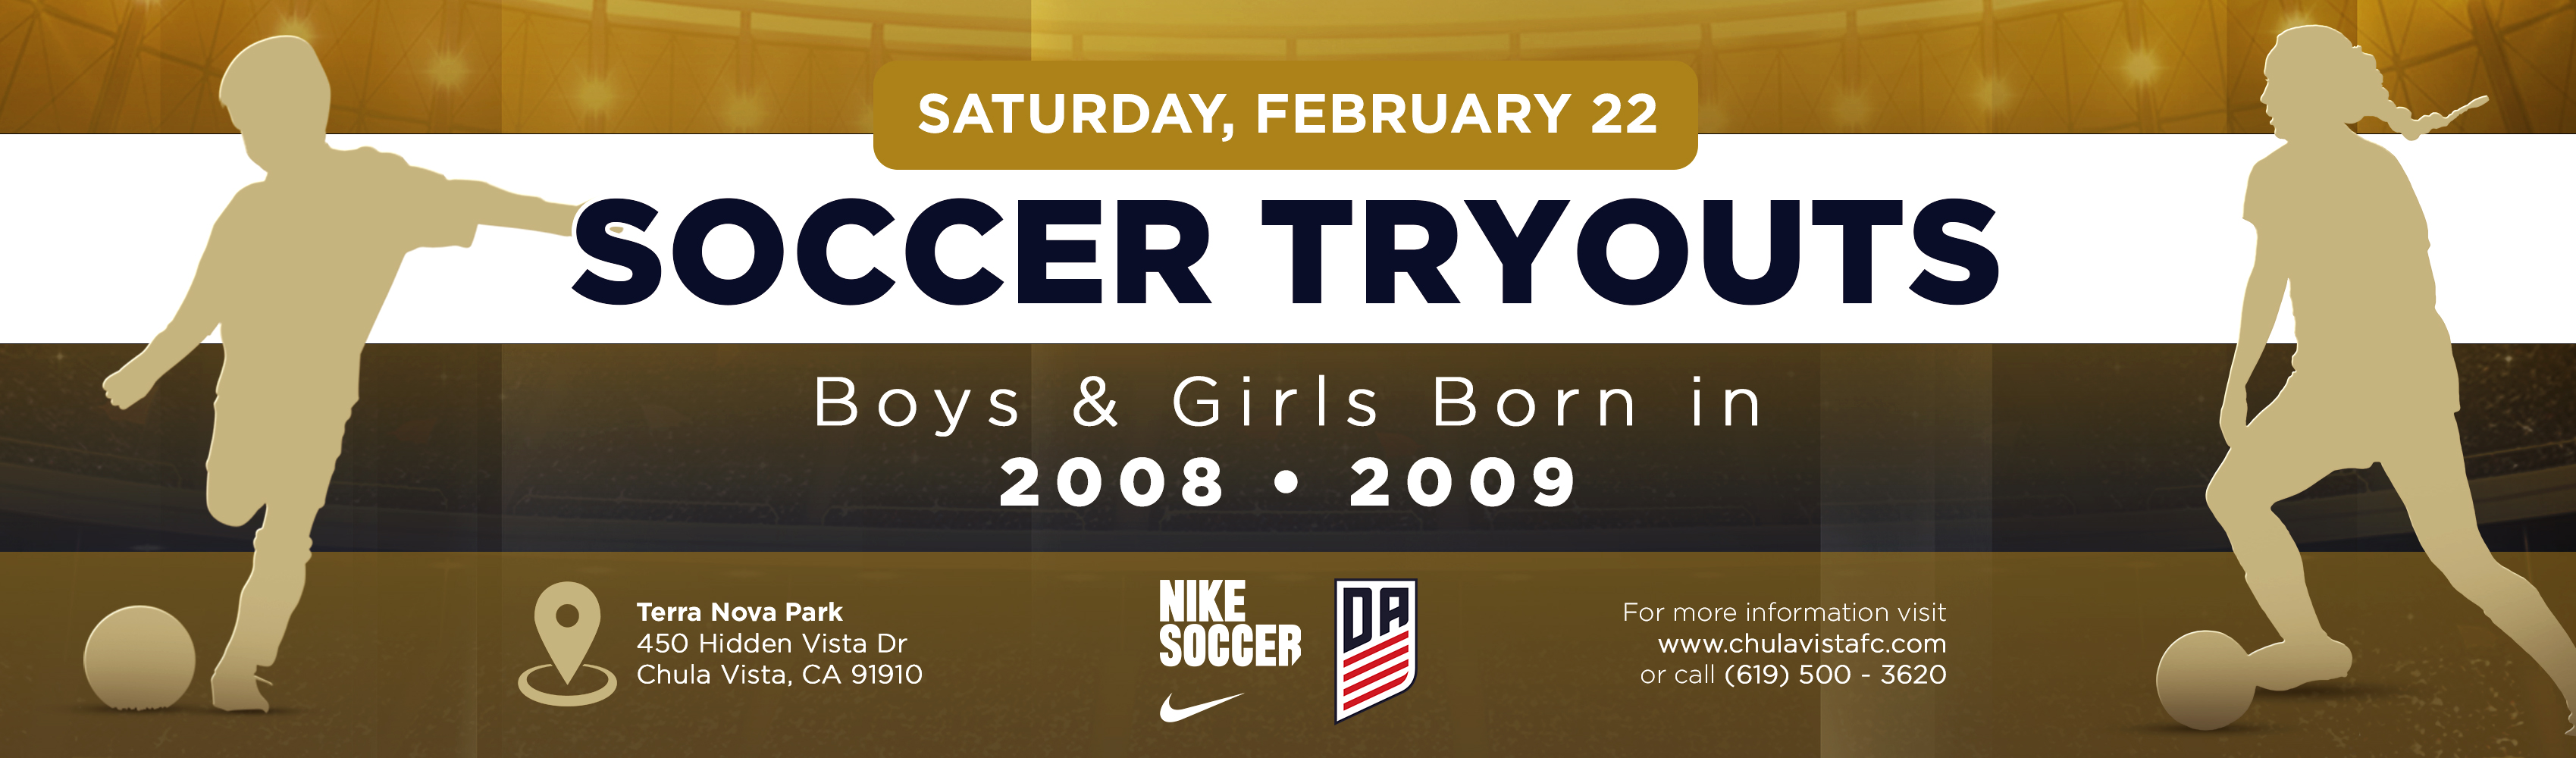 Younger Tryouts Announced